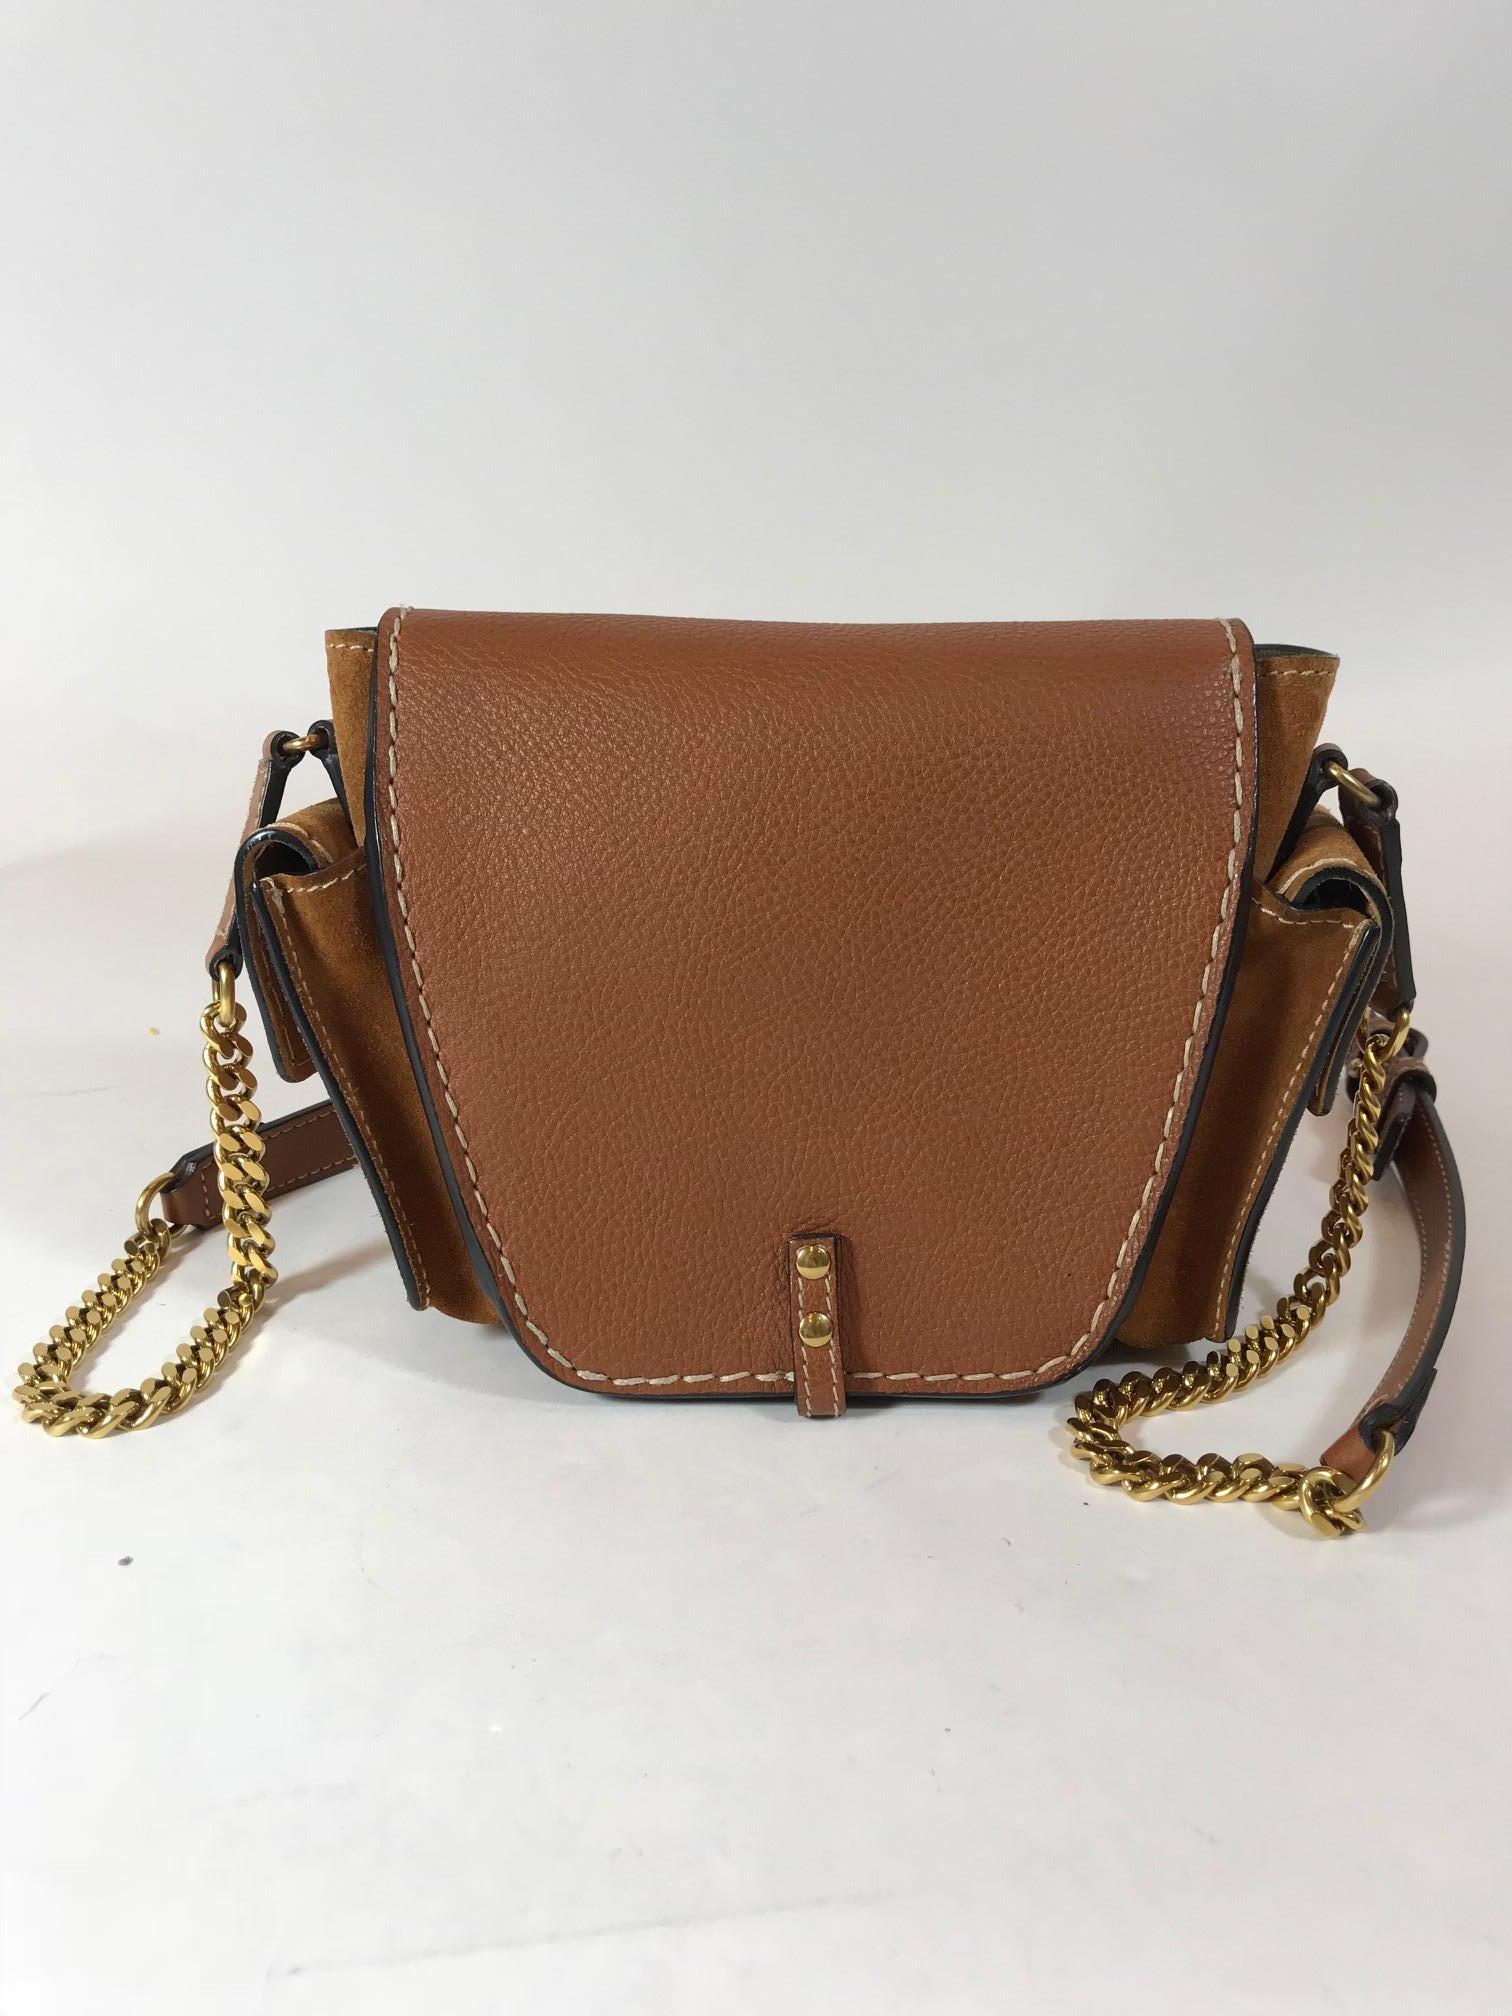 Chloé Small Jodie Crossbody Bag In Excellent Condition For Sale In Roslyn, NY